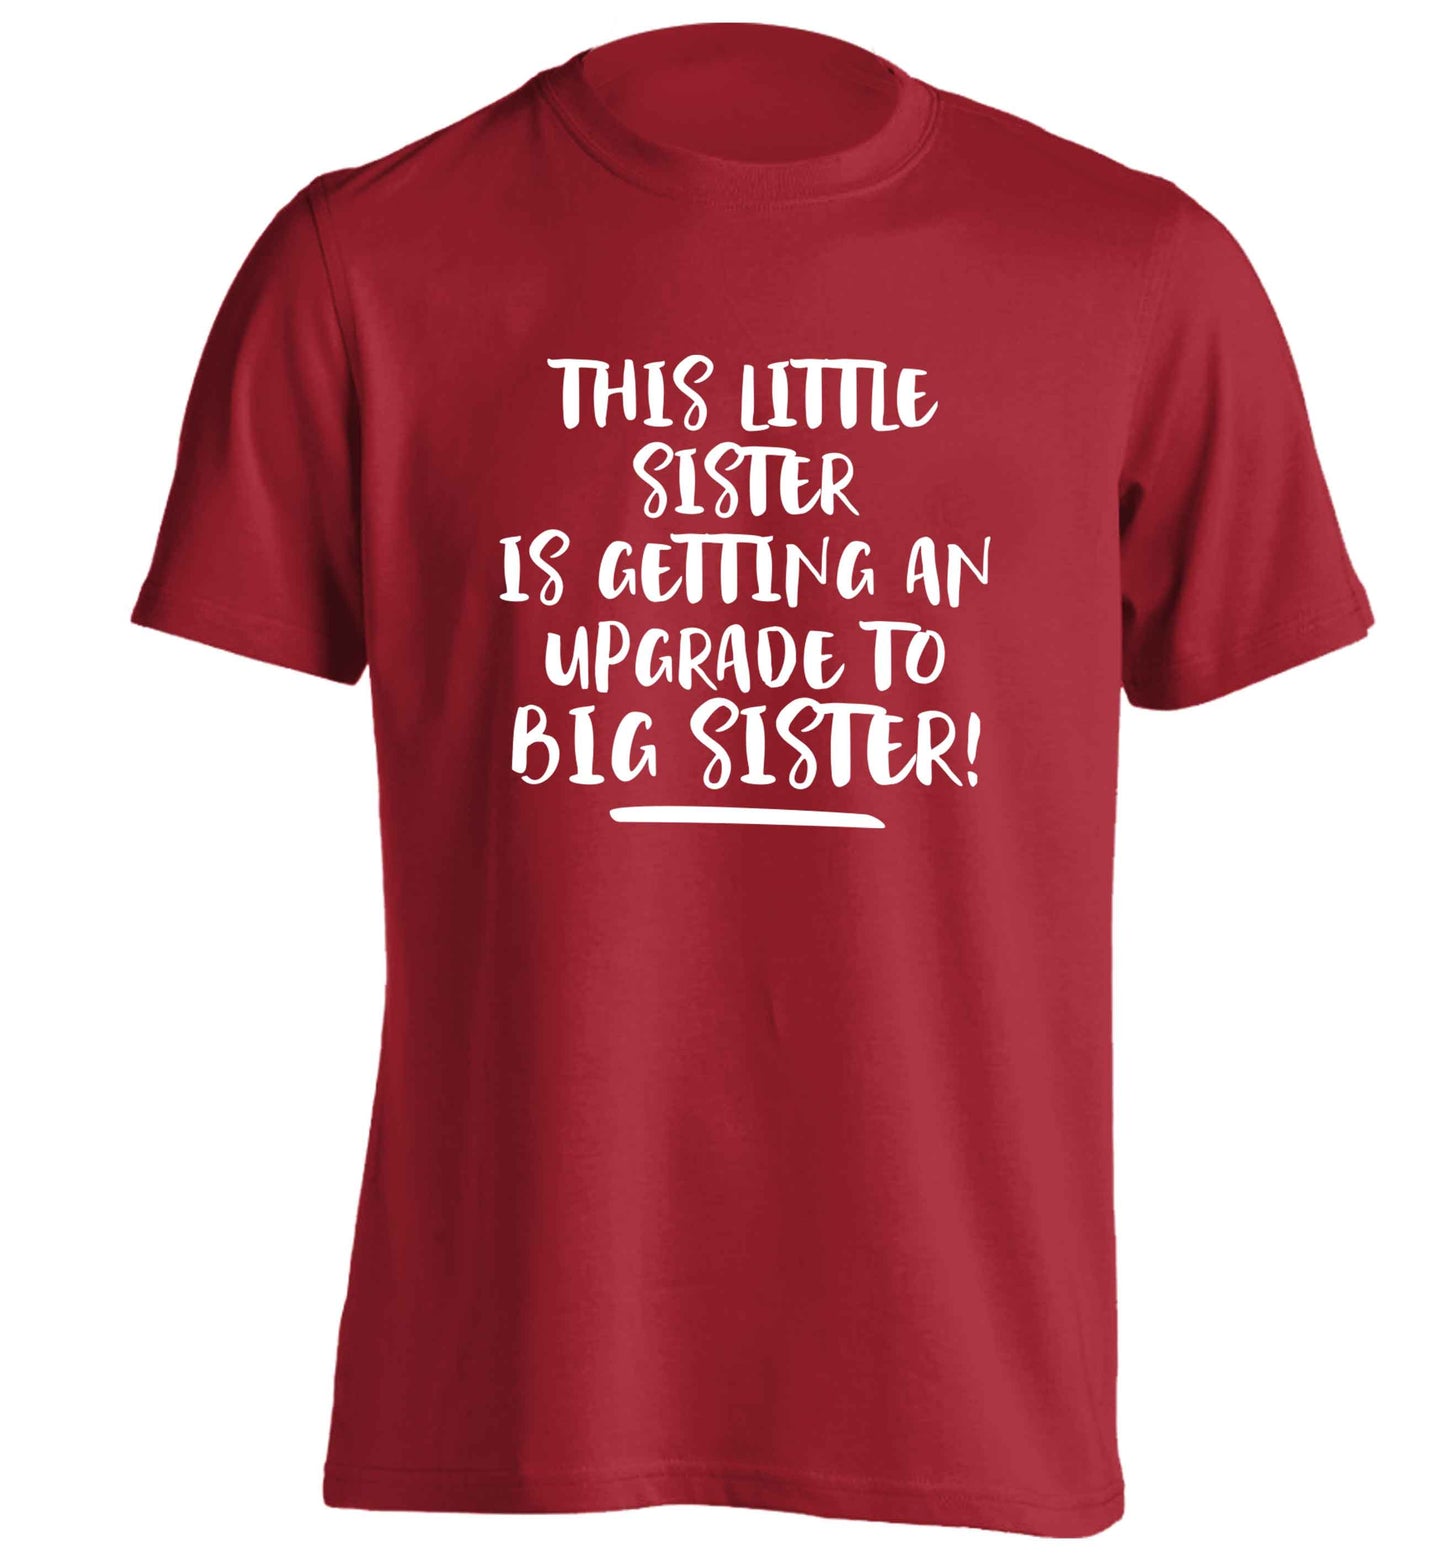 This little sister is getting an upgrade to big sister! adults unisex red Tshirt 2XL